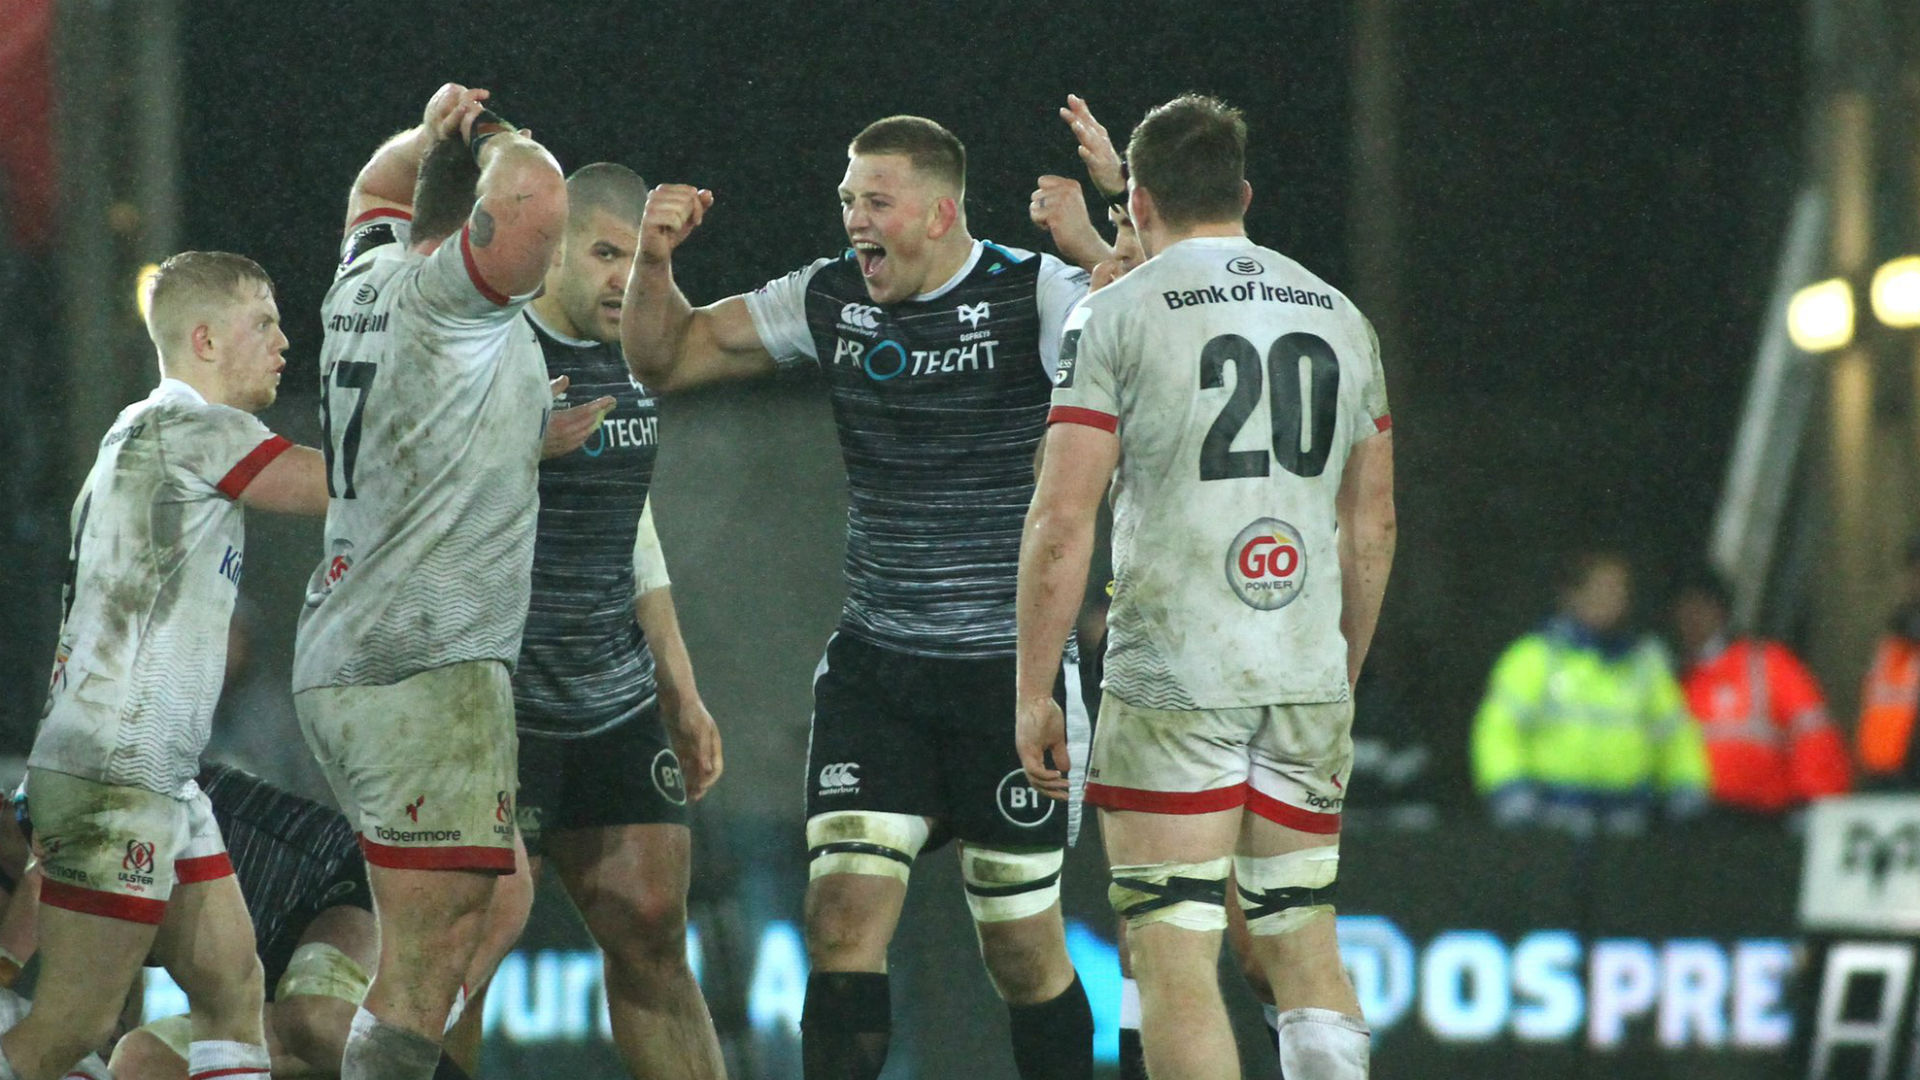 Ulster pays the Price in stormy Swansea